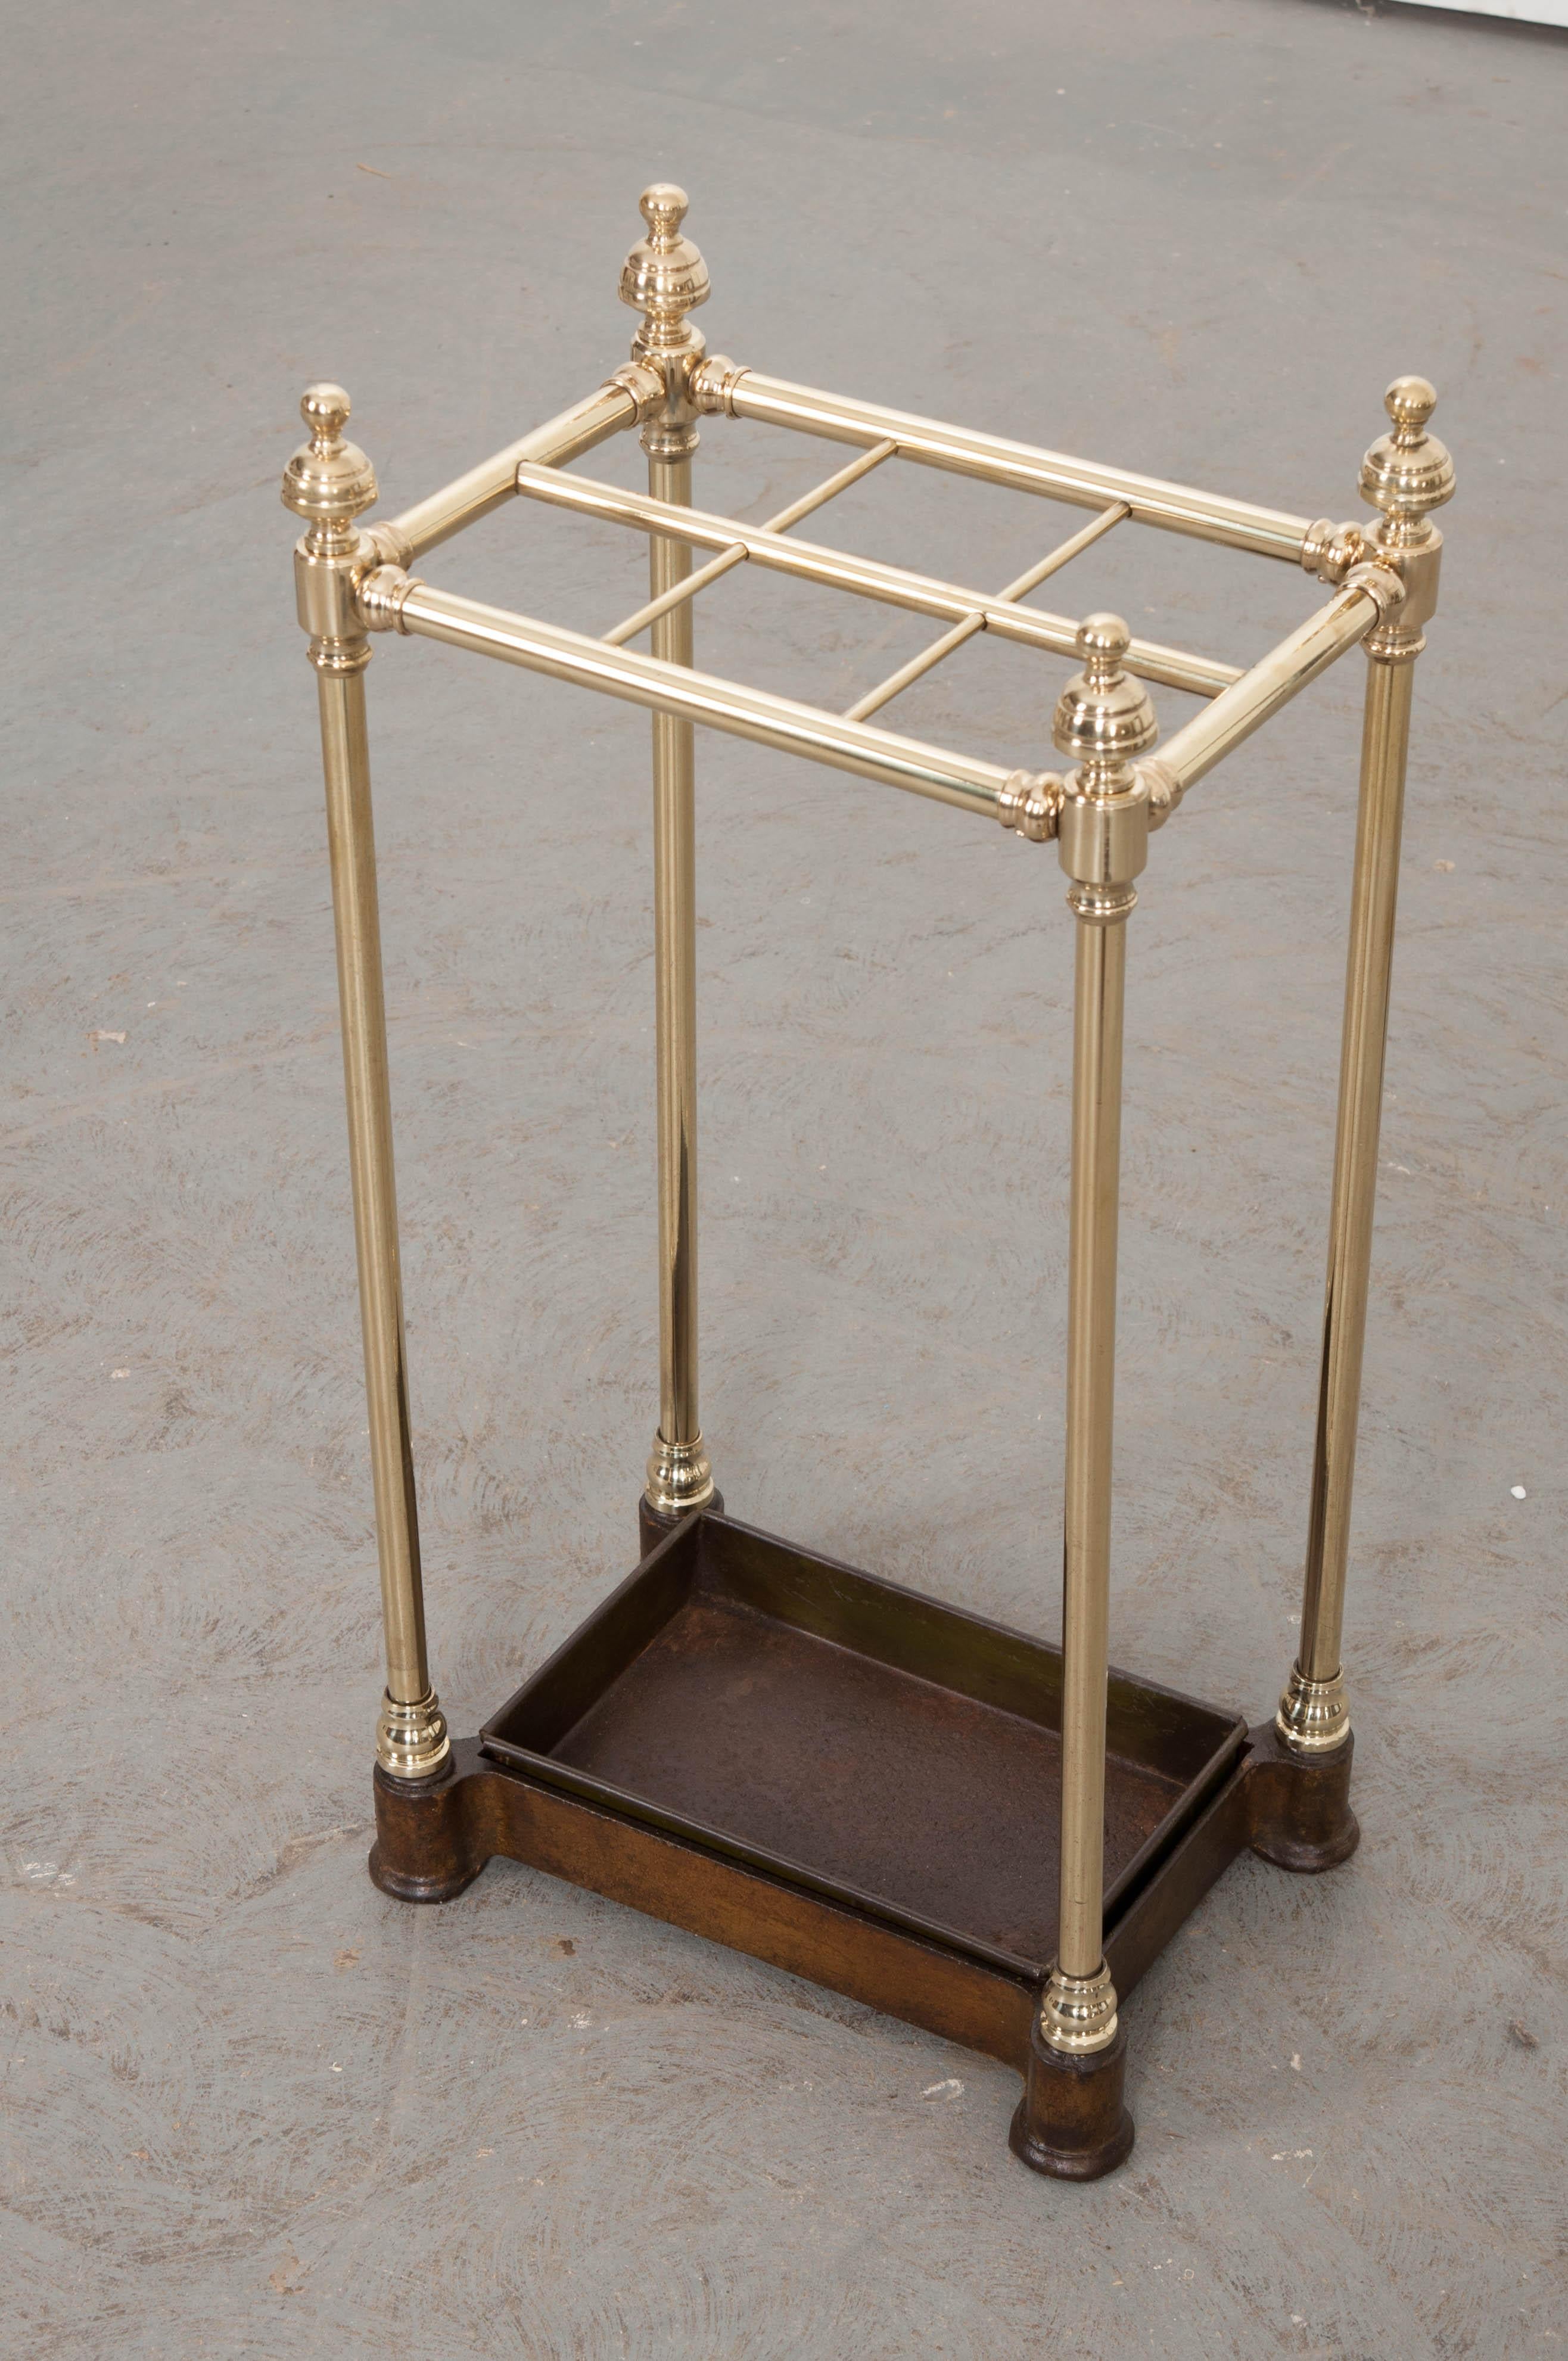 After trekking through the elements, leave your umbrella by the door in this polished brass umbrella stand made in England, circa 1900. The antique has spaces for up to six umbrellas or parasols. The upright supports are topped with decorative brass